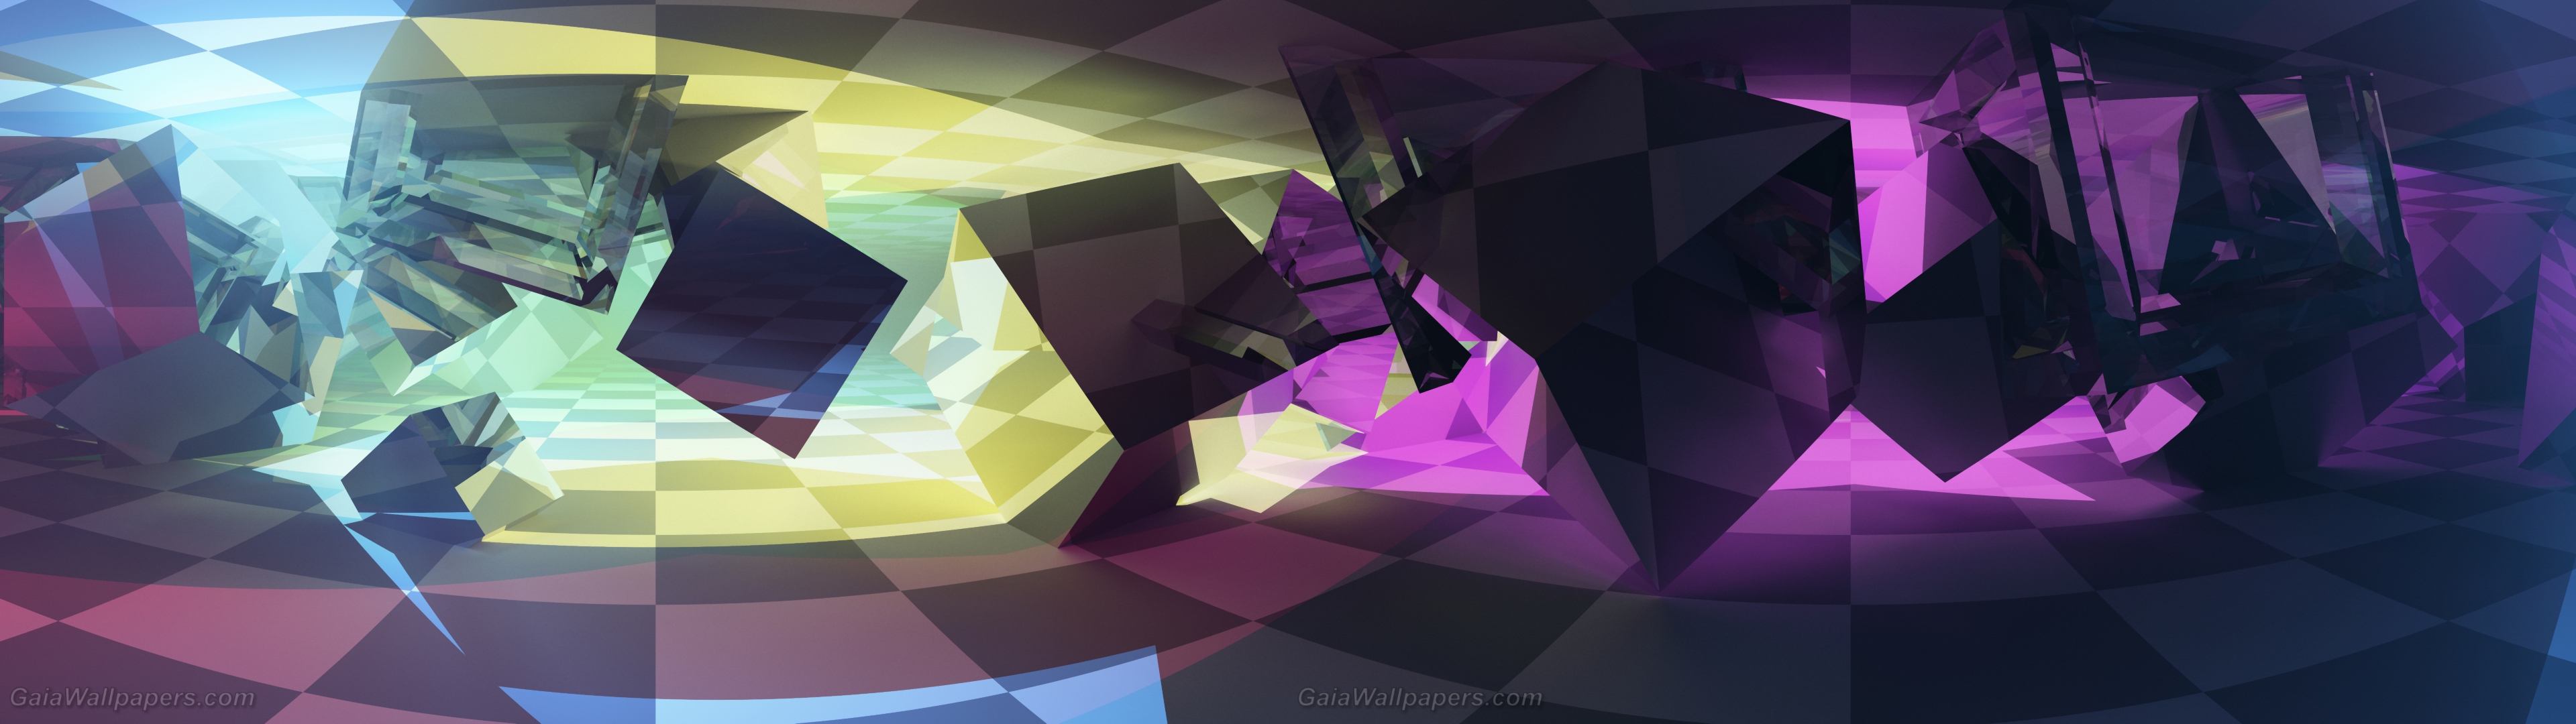 Colors in an inner cube world - Free desktop wallpapers